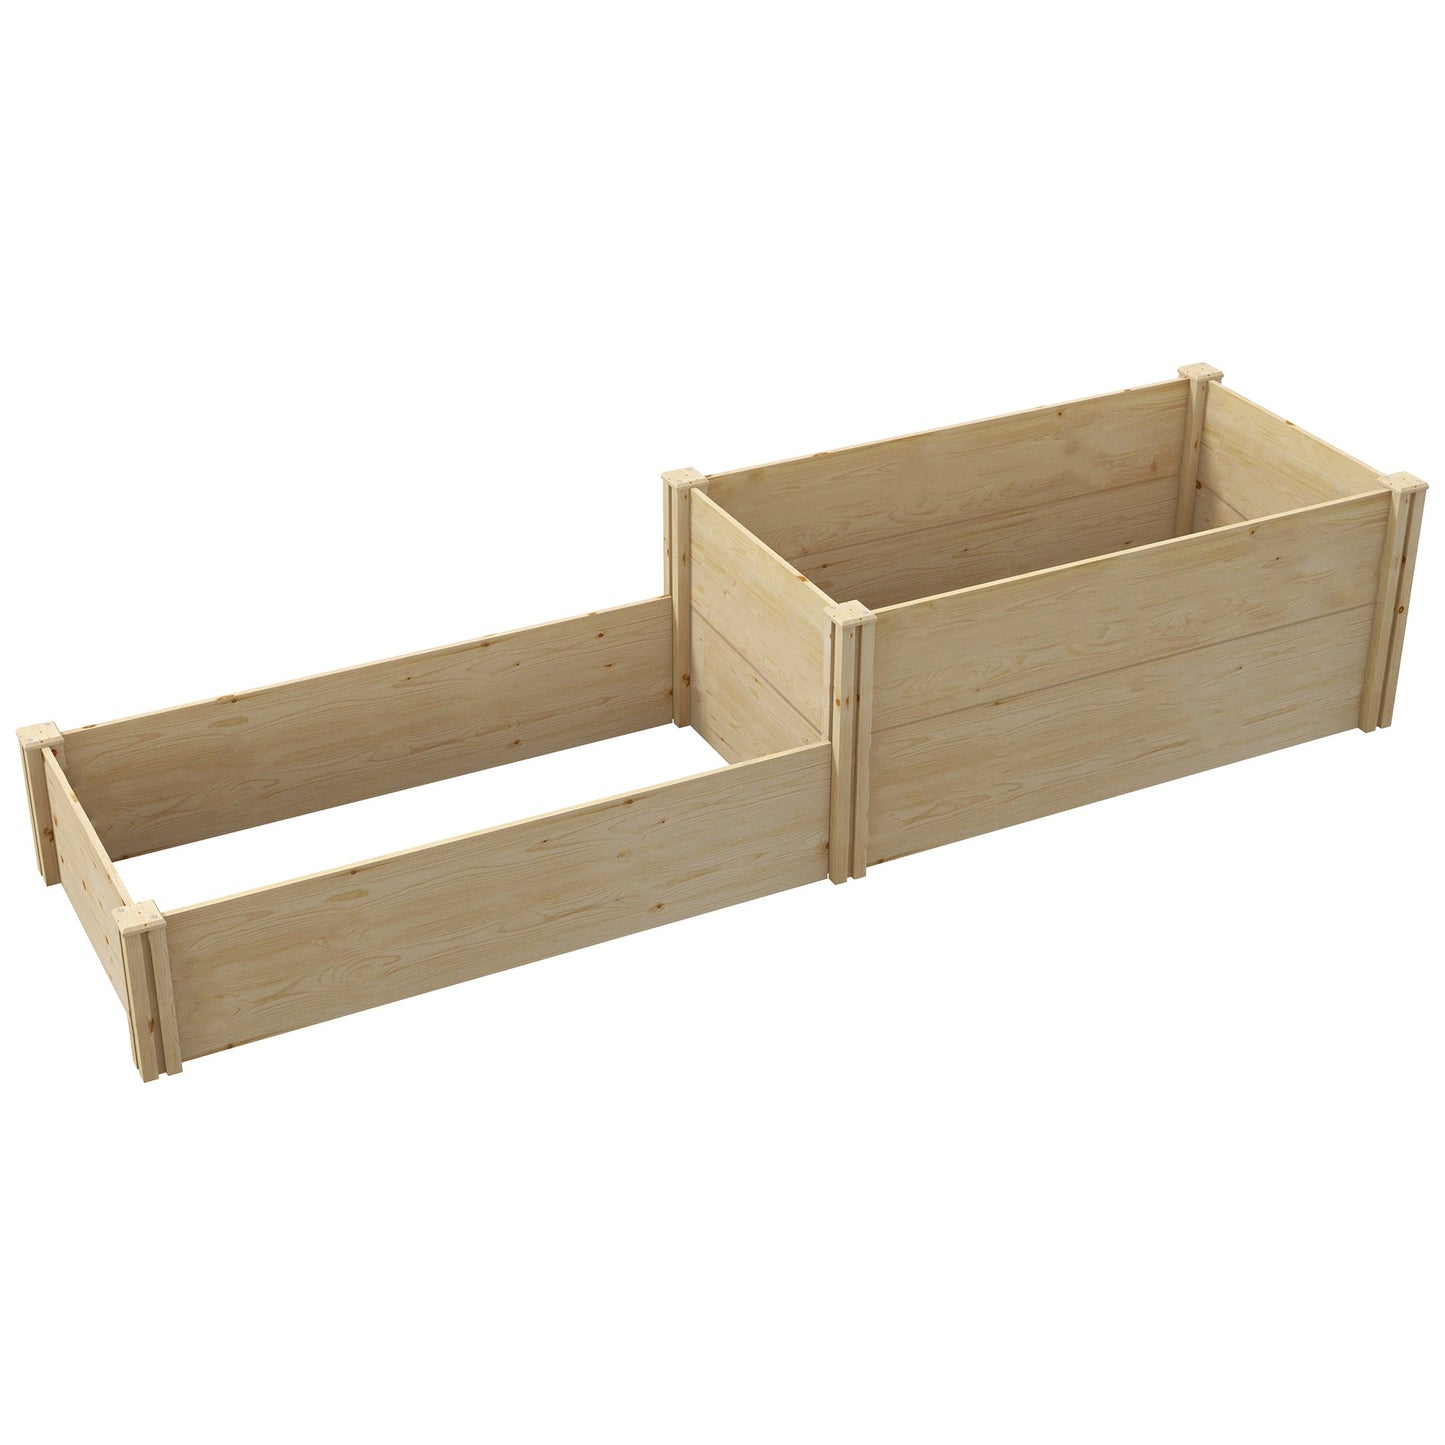 DIY Raised Garden Bed, Two-Box Wooden Planters for Outdoor Vegetables, Flowers, Herbs, Plants, Easy Assembly at Gallery Canada